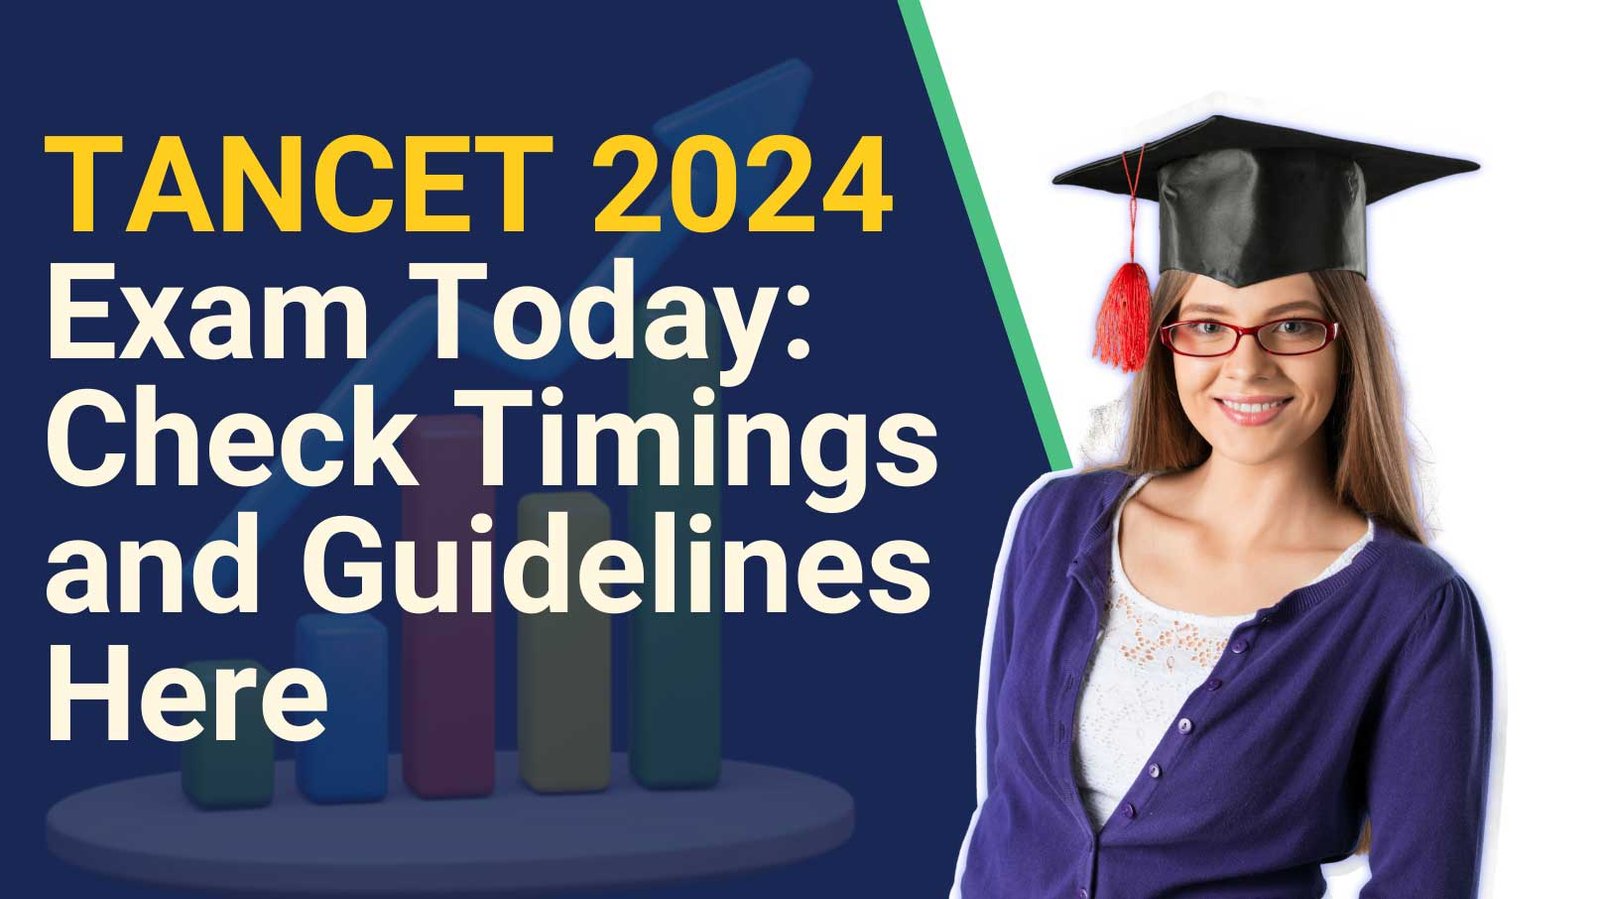 TANCET 2024 Exam Today: Check Timings and Guidelines Here